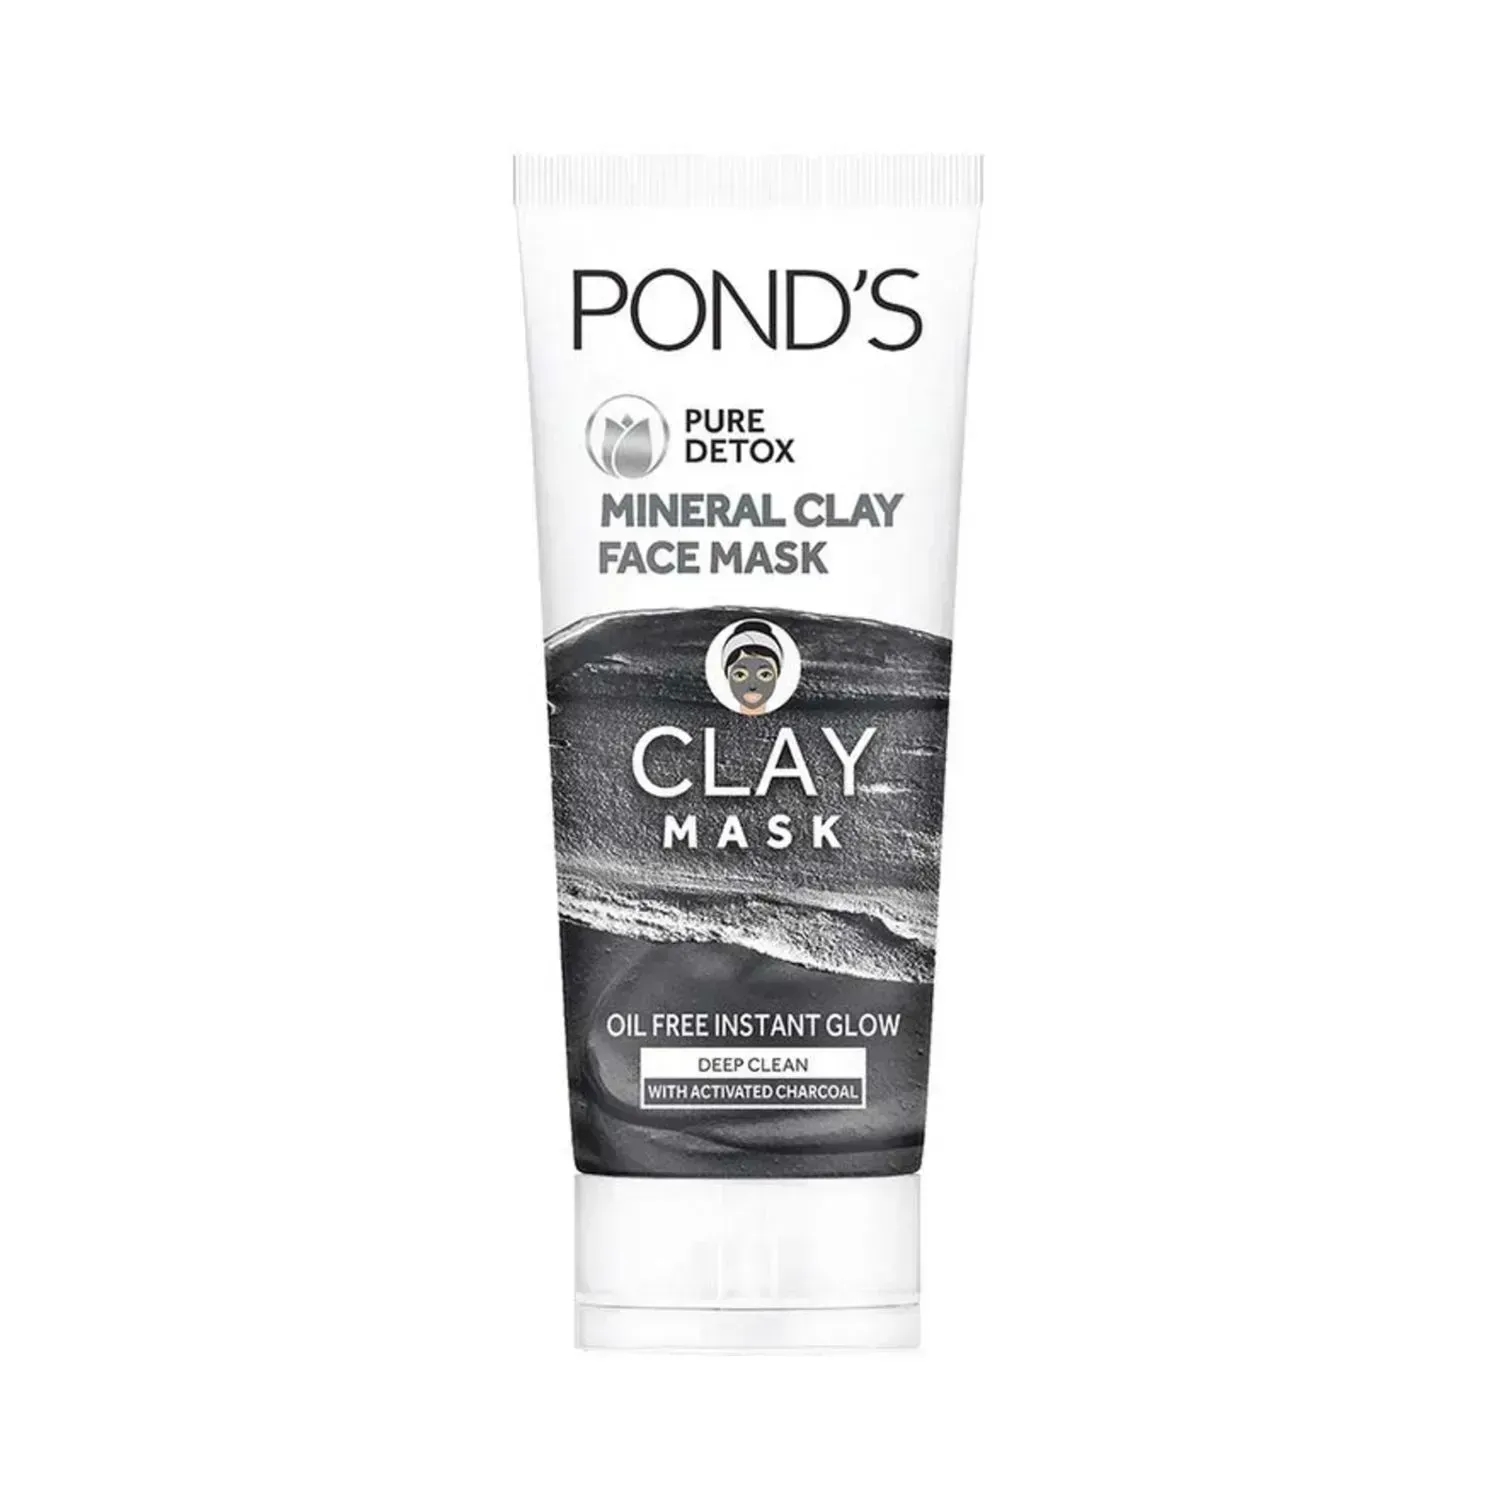 Pond's | Pond's Pure Detox Mineral Clay Face Mask For Oil Free Instant Glow - (90g)